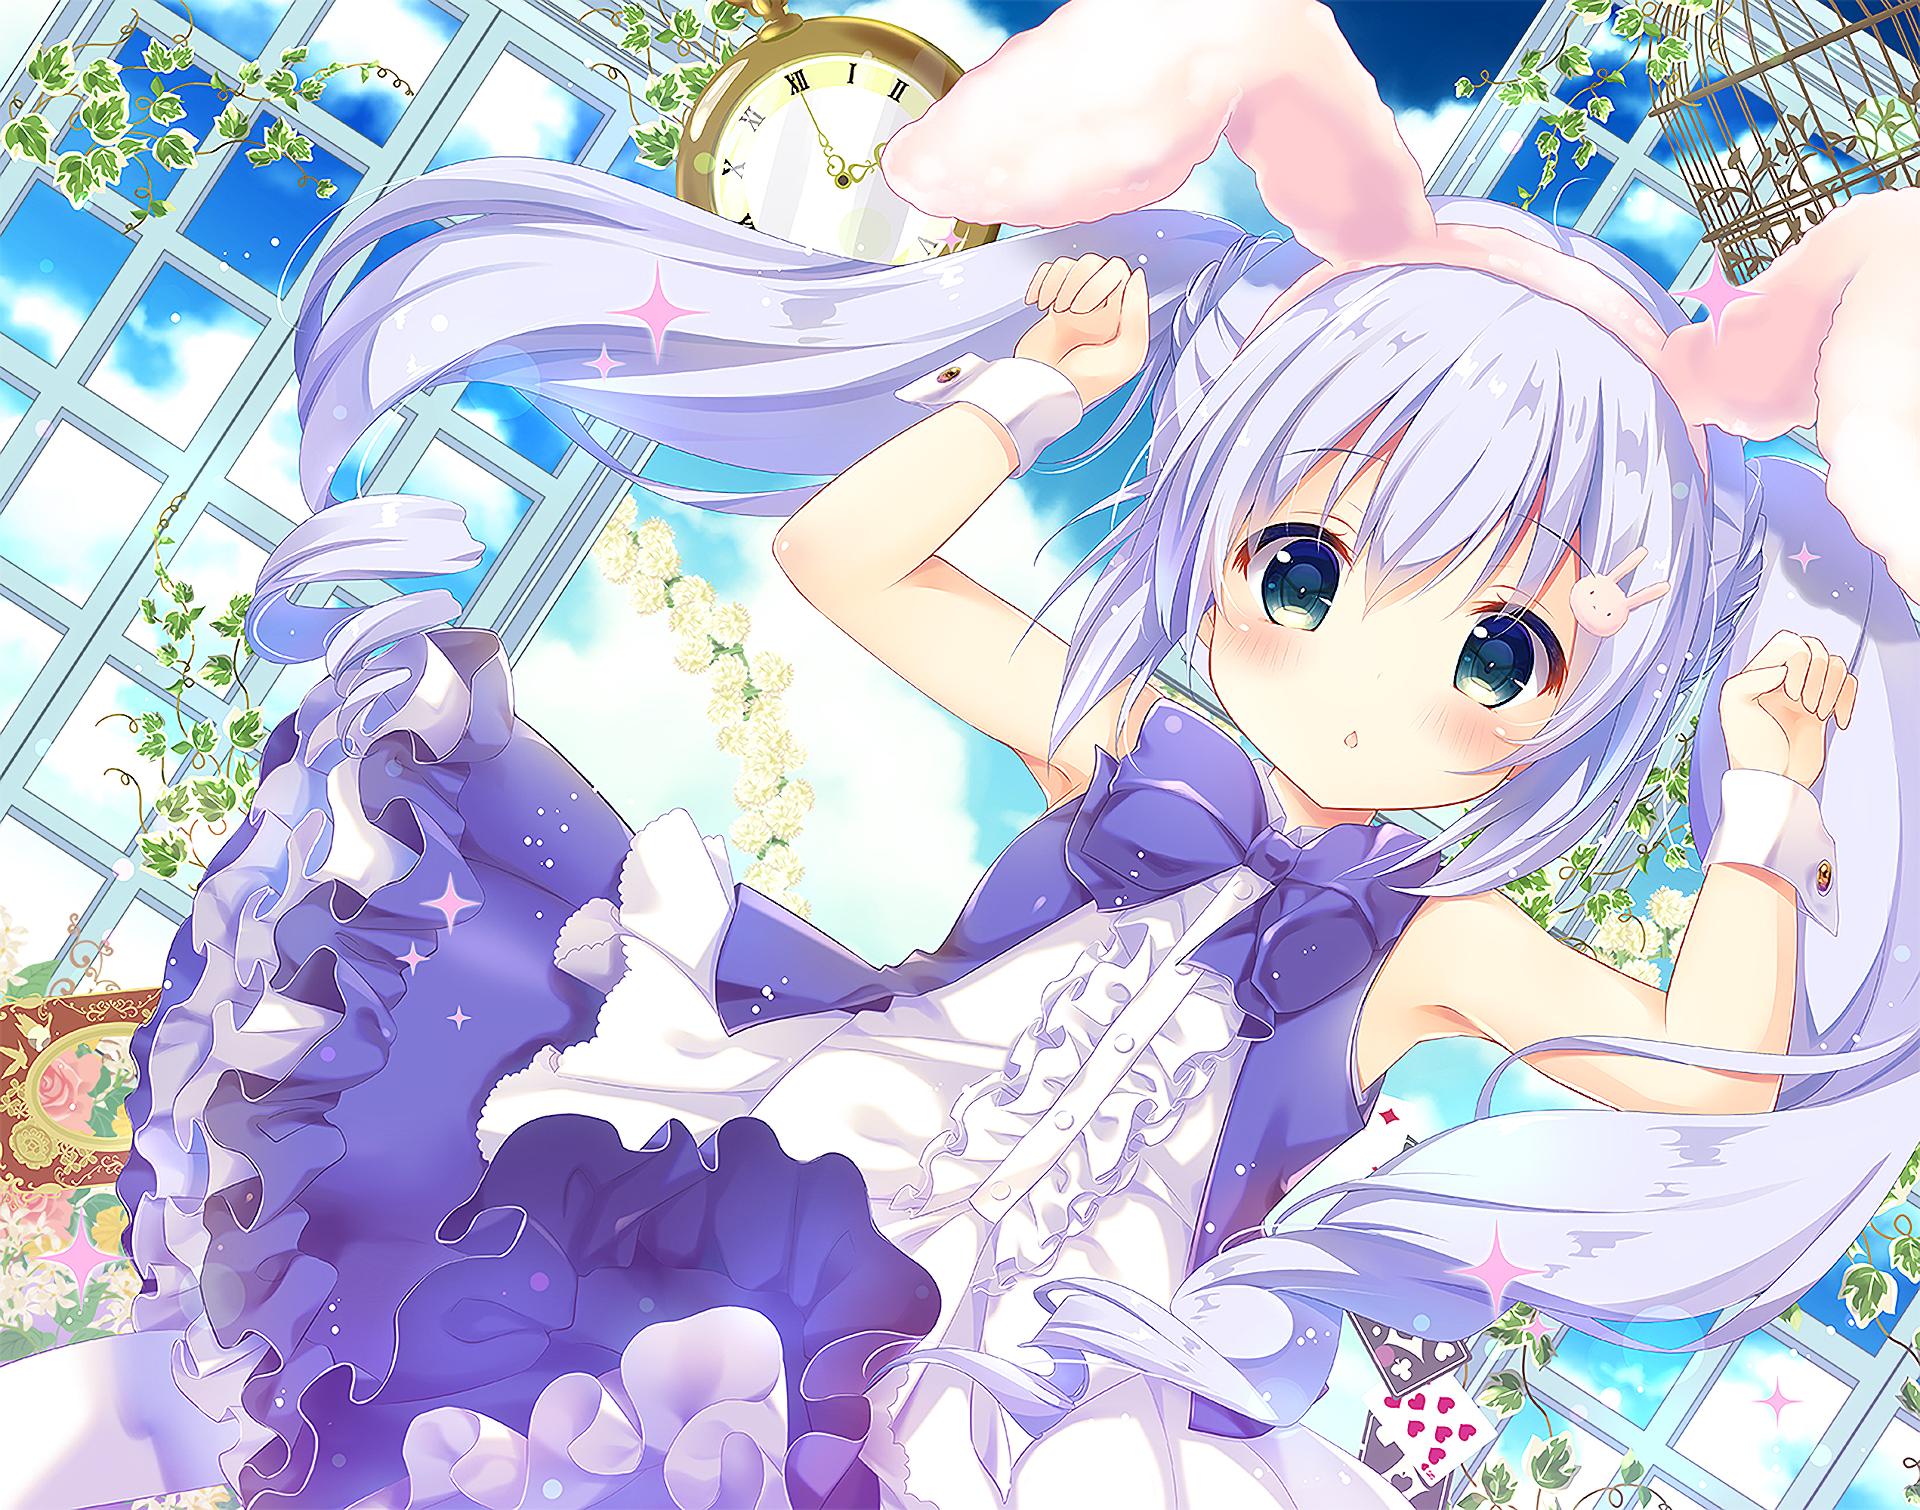 130 Chino Kafu Hd Wallpapers And Backgrounds